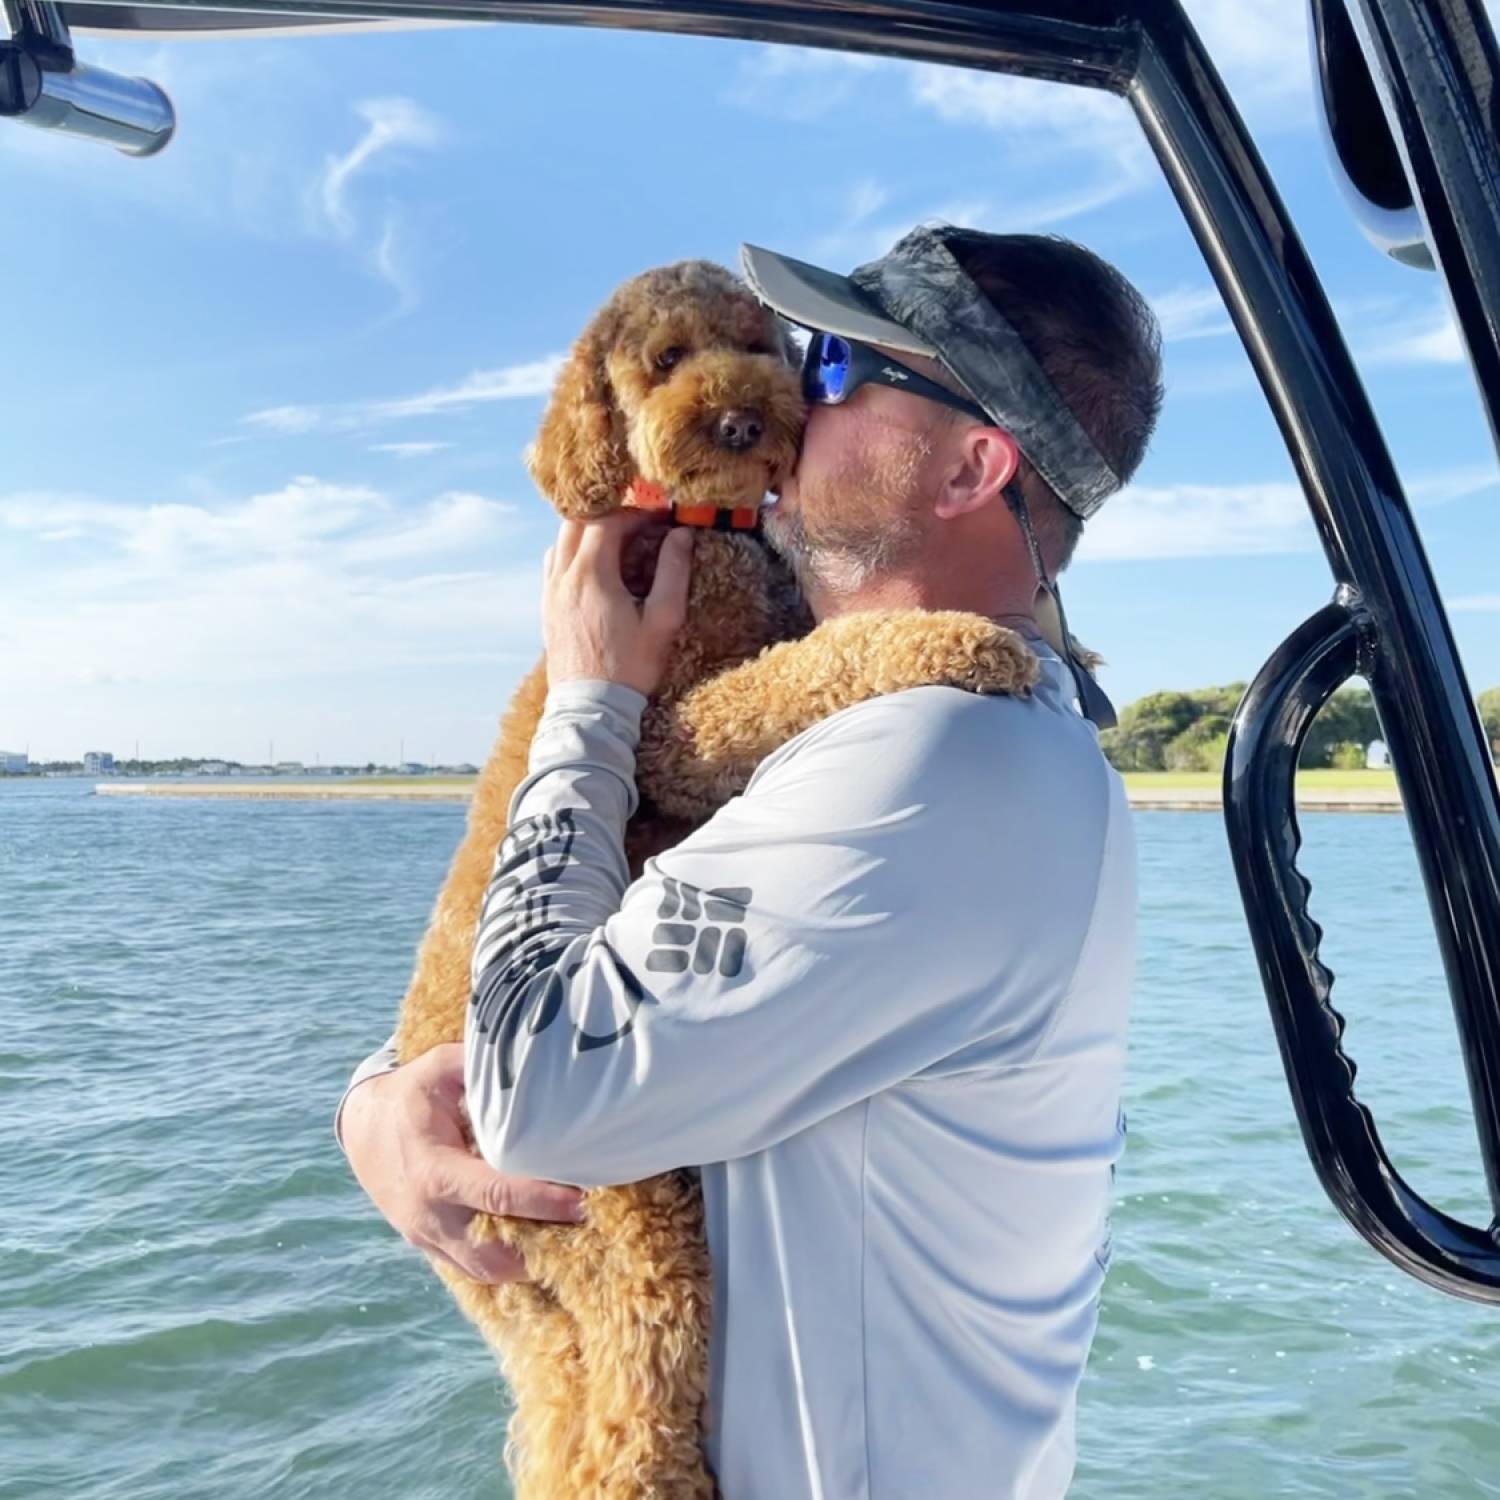 Title: Dog Days of summer - On board their Sportsman Open 282TE Center Console - Location: Beaufort, NC. Participating in the Photo Contest #SportsmanSeptember